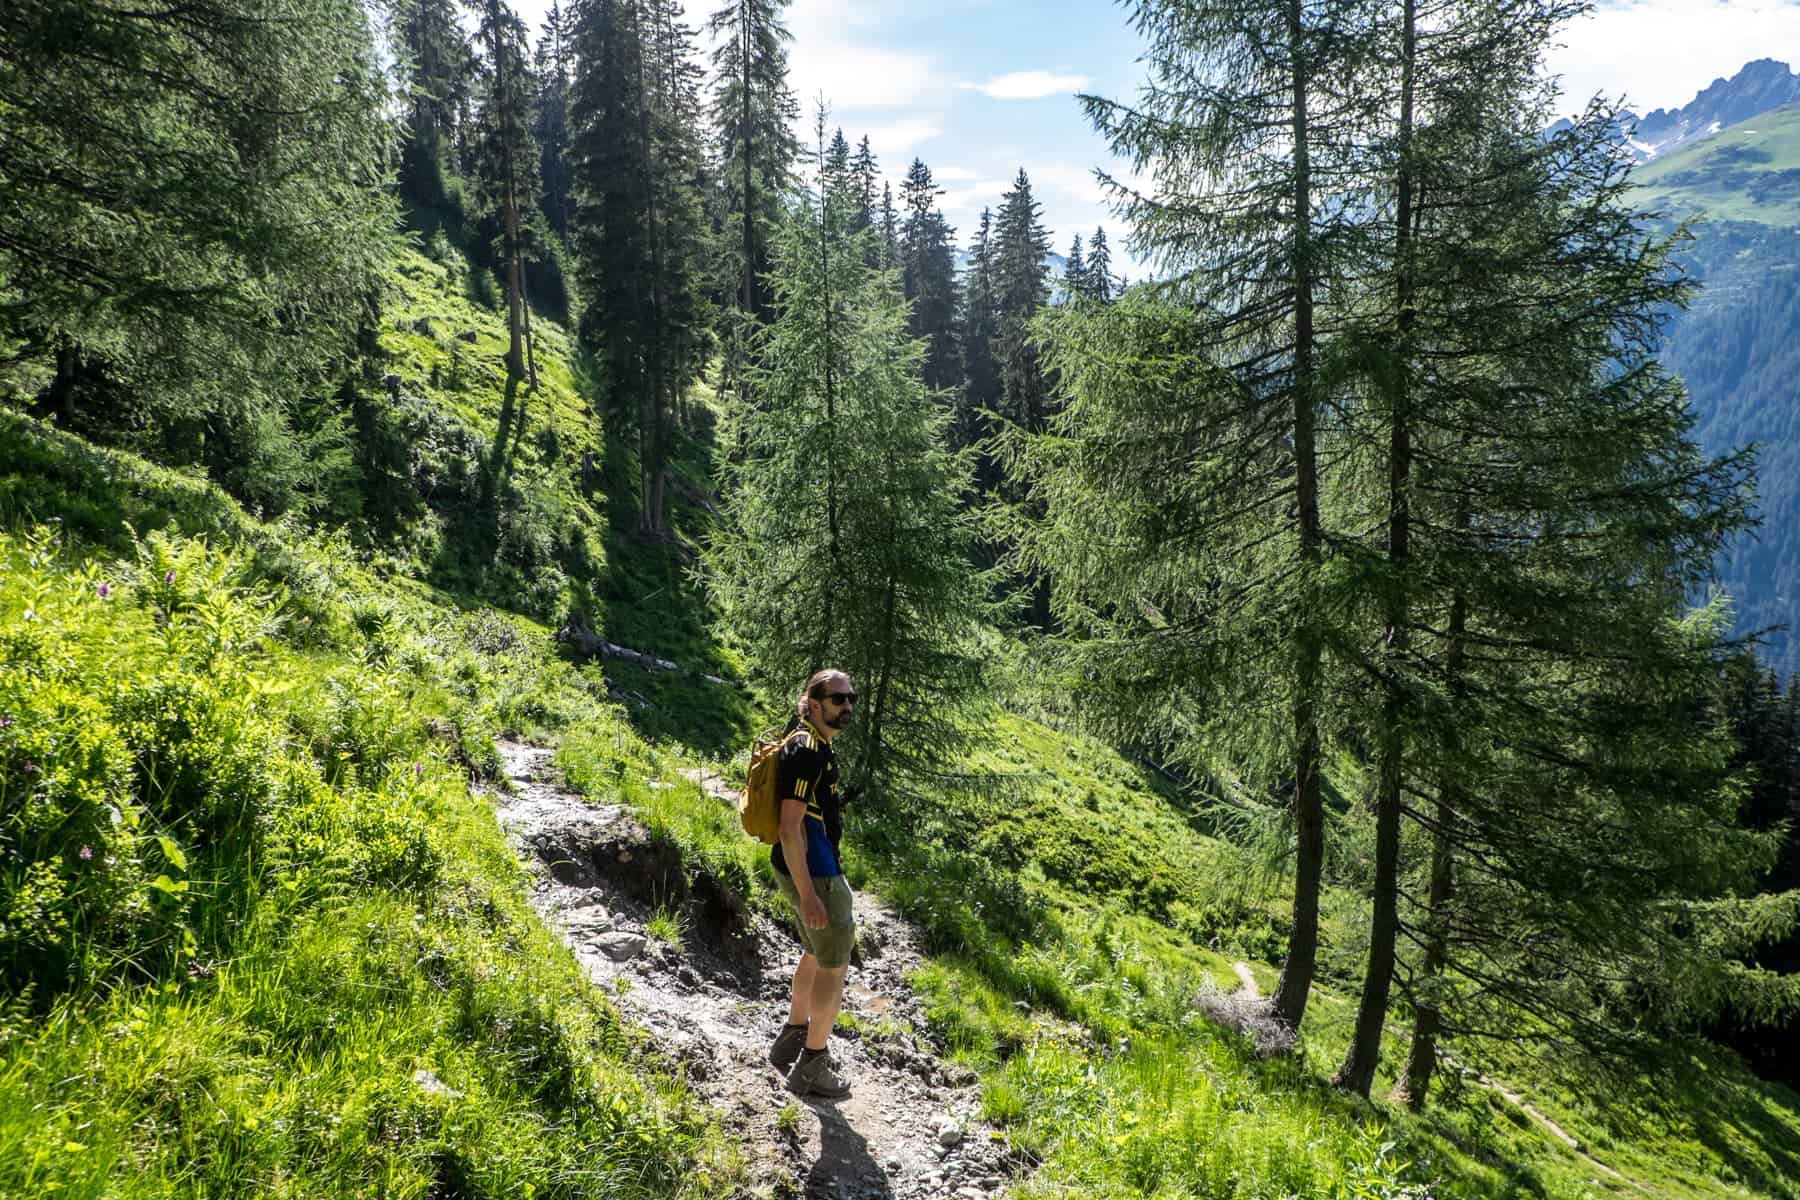 A man stands on a hiking trail in St. Anton surrounded by green grassland and a forest of tall, thin trees